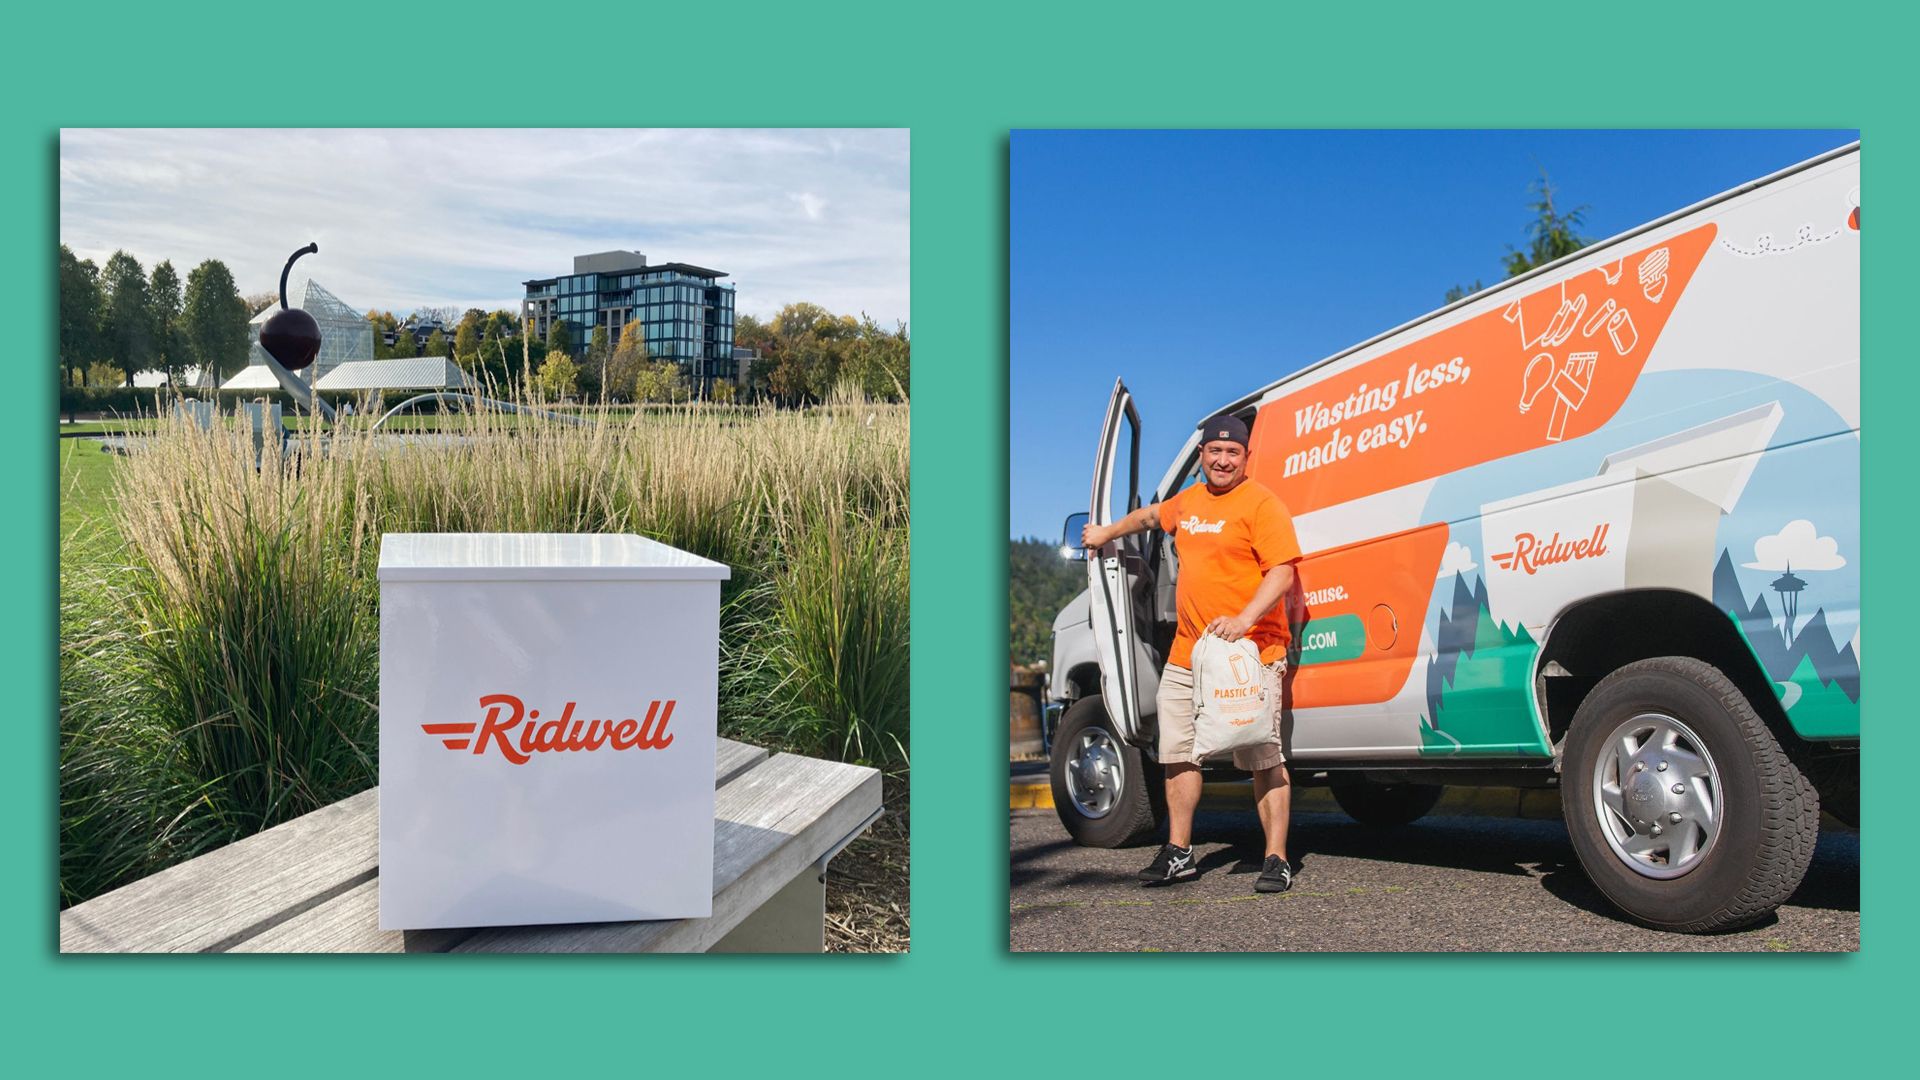 A white box with the word ridwell on it in orange, and an orange branded Ridwell van.